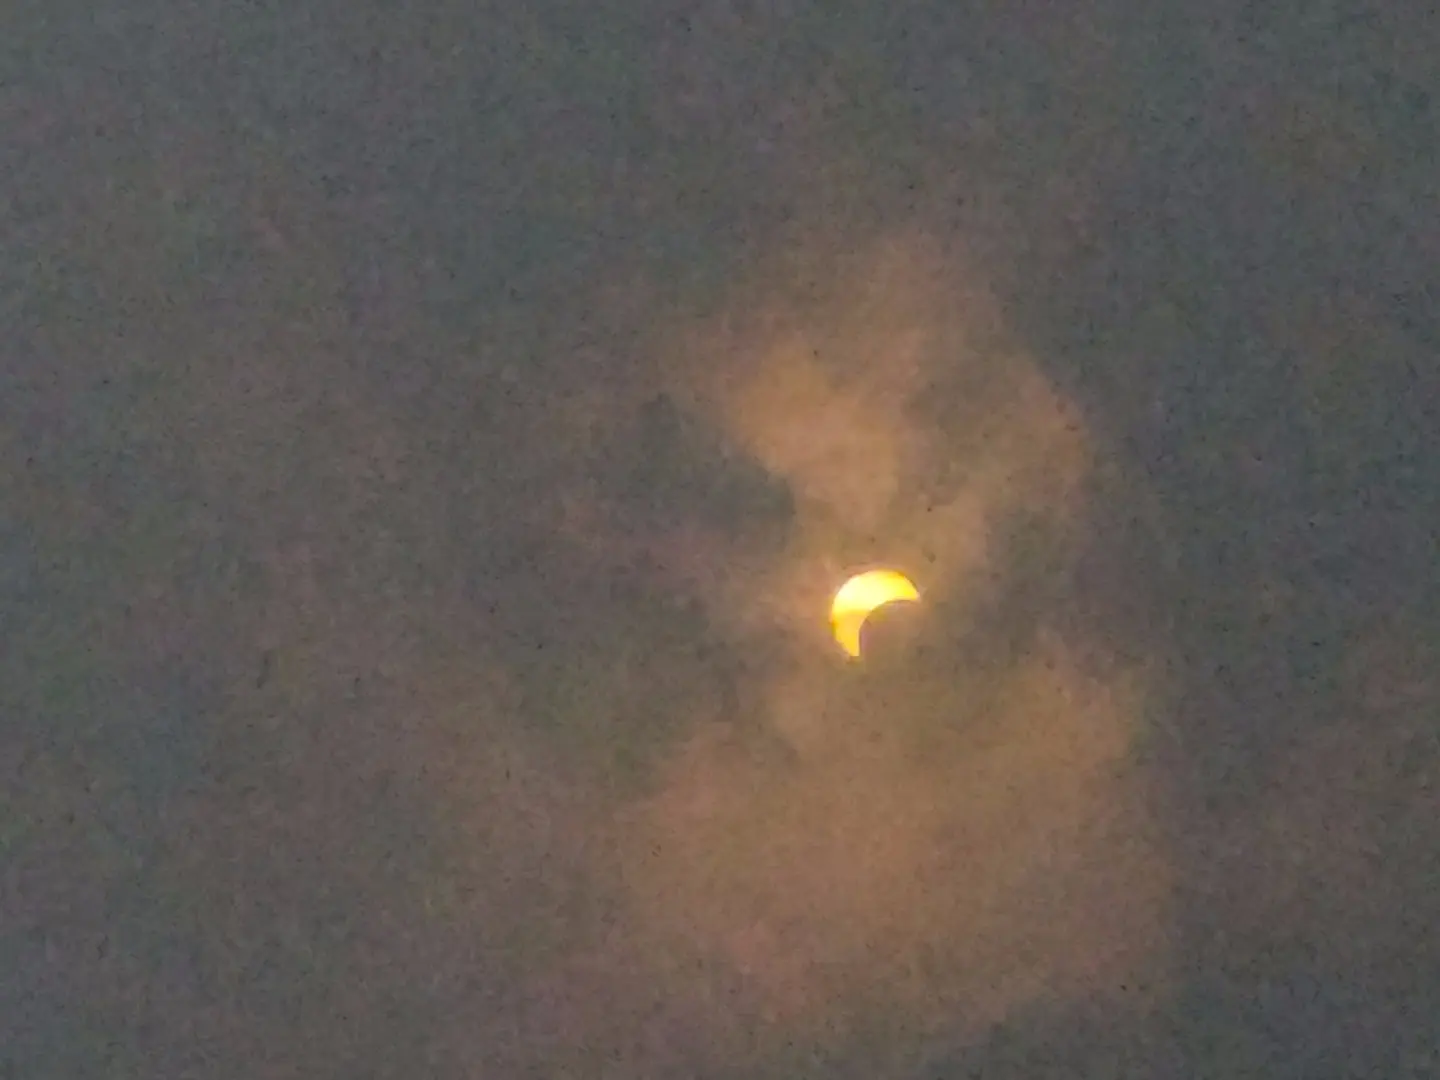 Partial solar eclipse with clouds overcovering